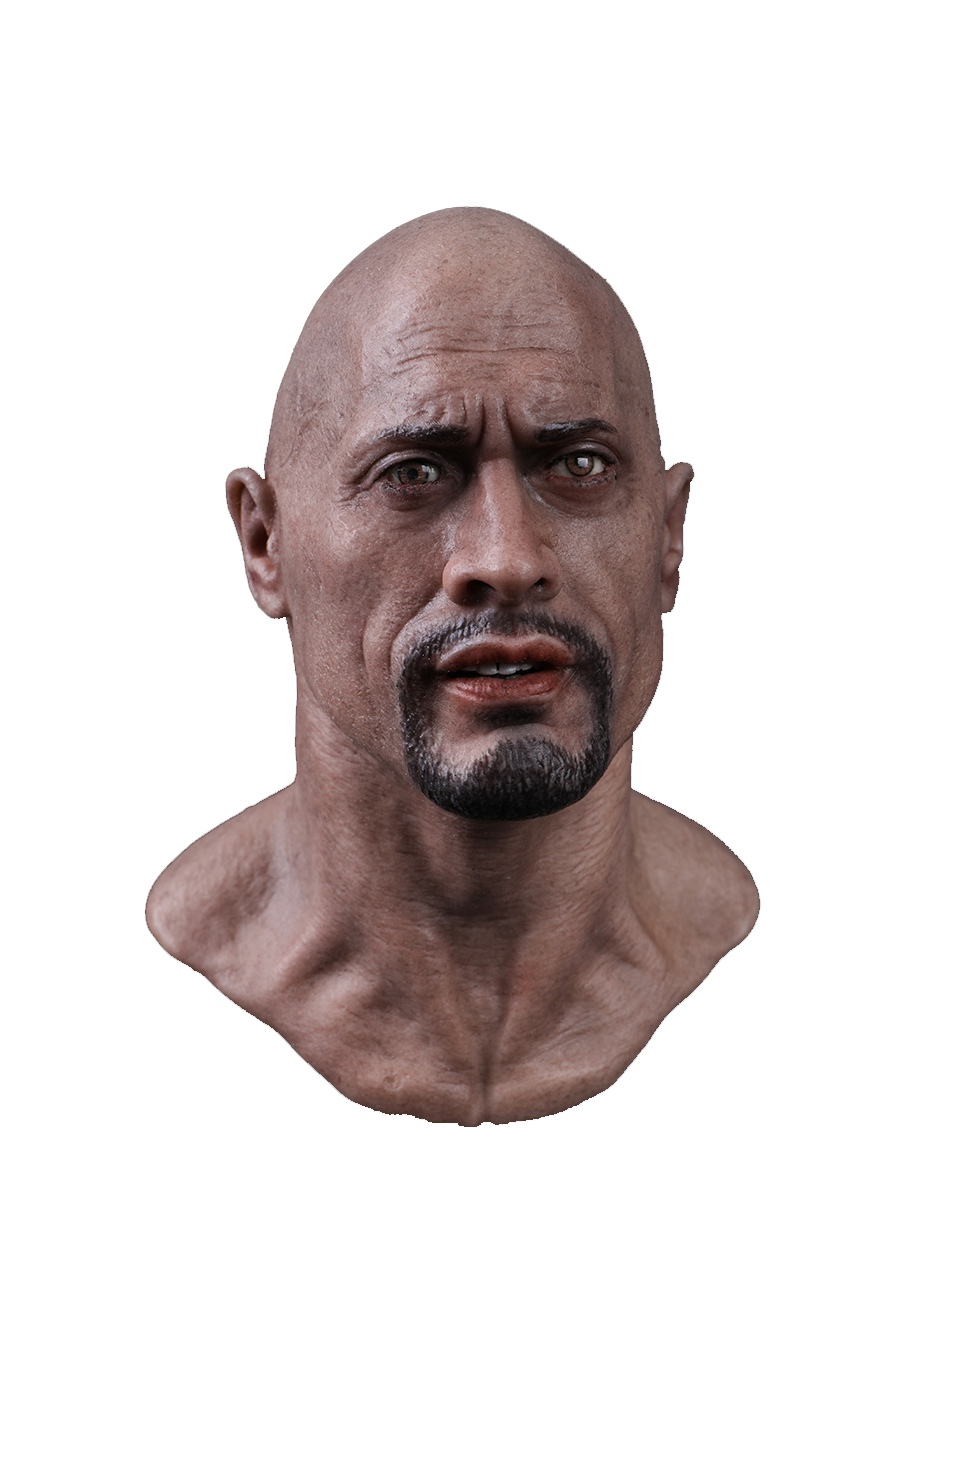 ChenToys - NEW PRODUCT: COOMODEL & CHENTOYS: 1/6 full silicone figurative head carving #SG001 20070910